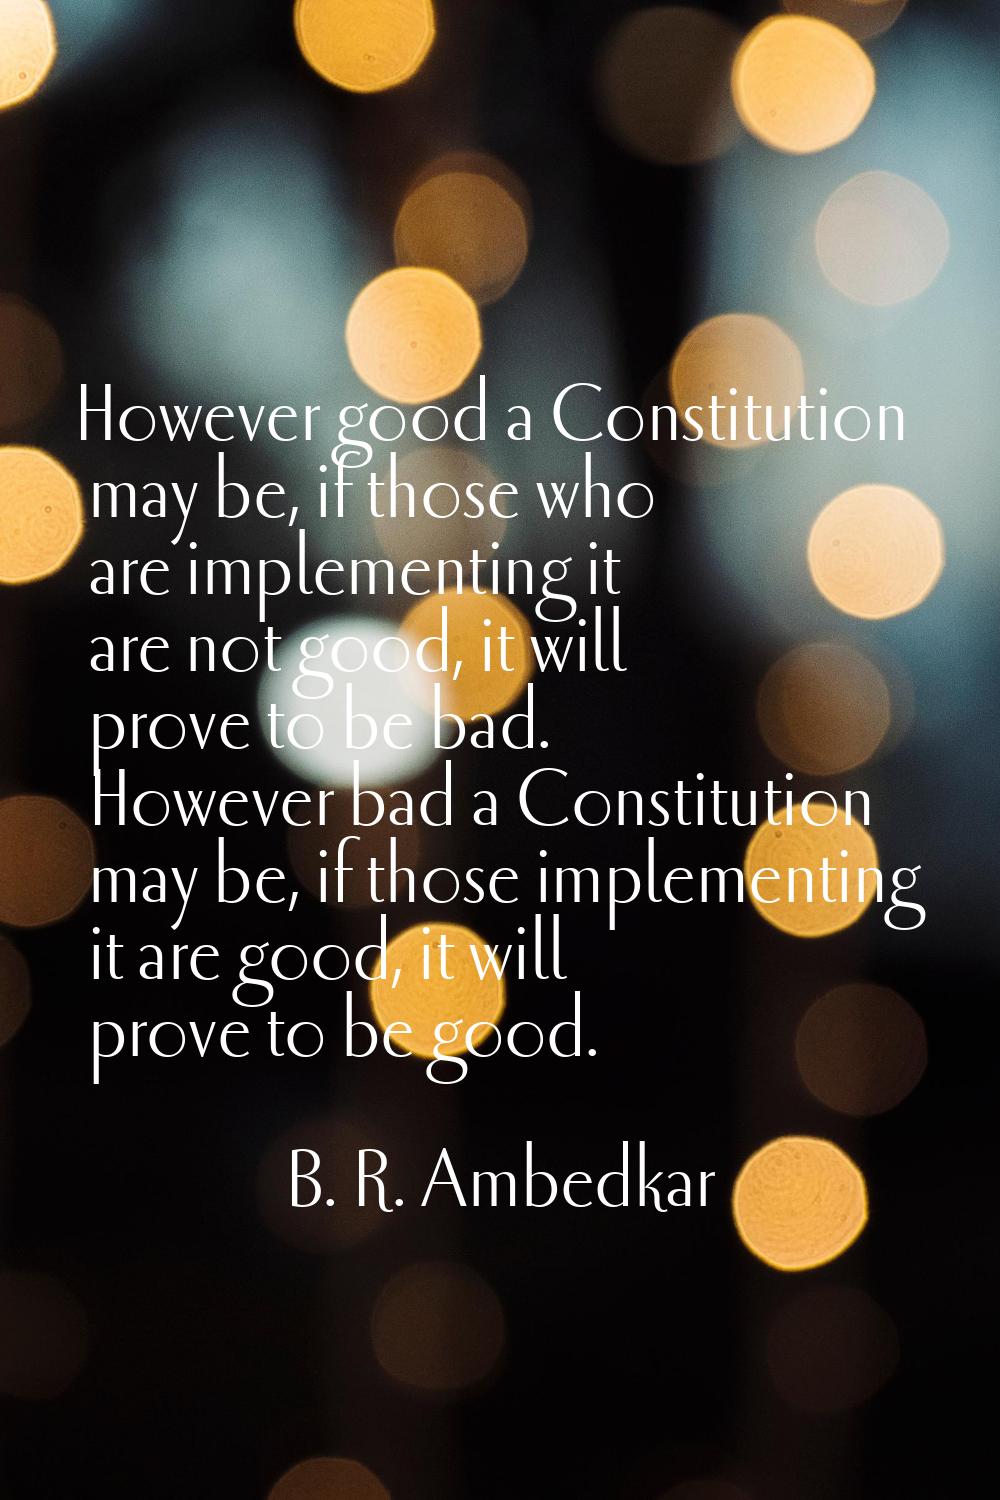 However good a Constitution may be, if those who are implementing it are not good, it will prove to